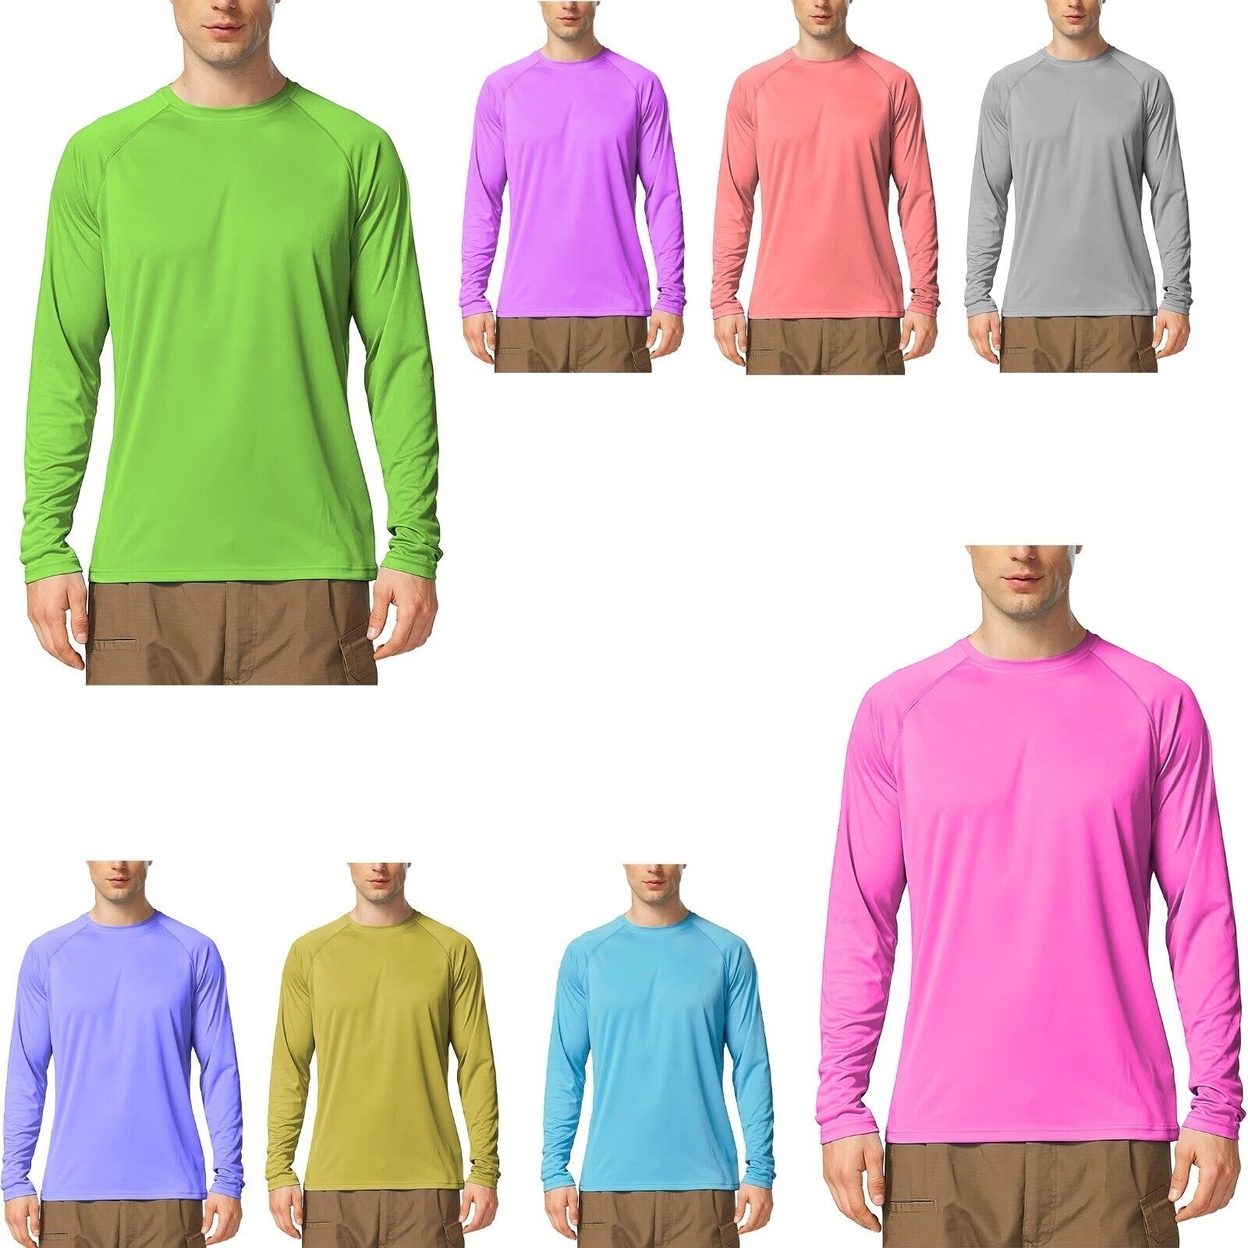 Multi-Pack: Men's Dri-Fit Moisture Wicking Athletic Cool Performance Slim Fit Long Sleeve T-Shirts - 3-pack, Large